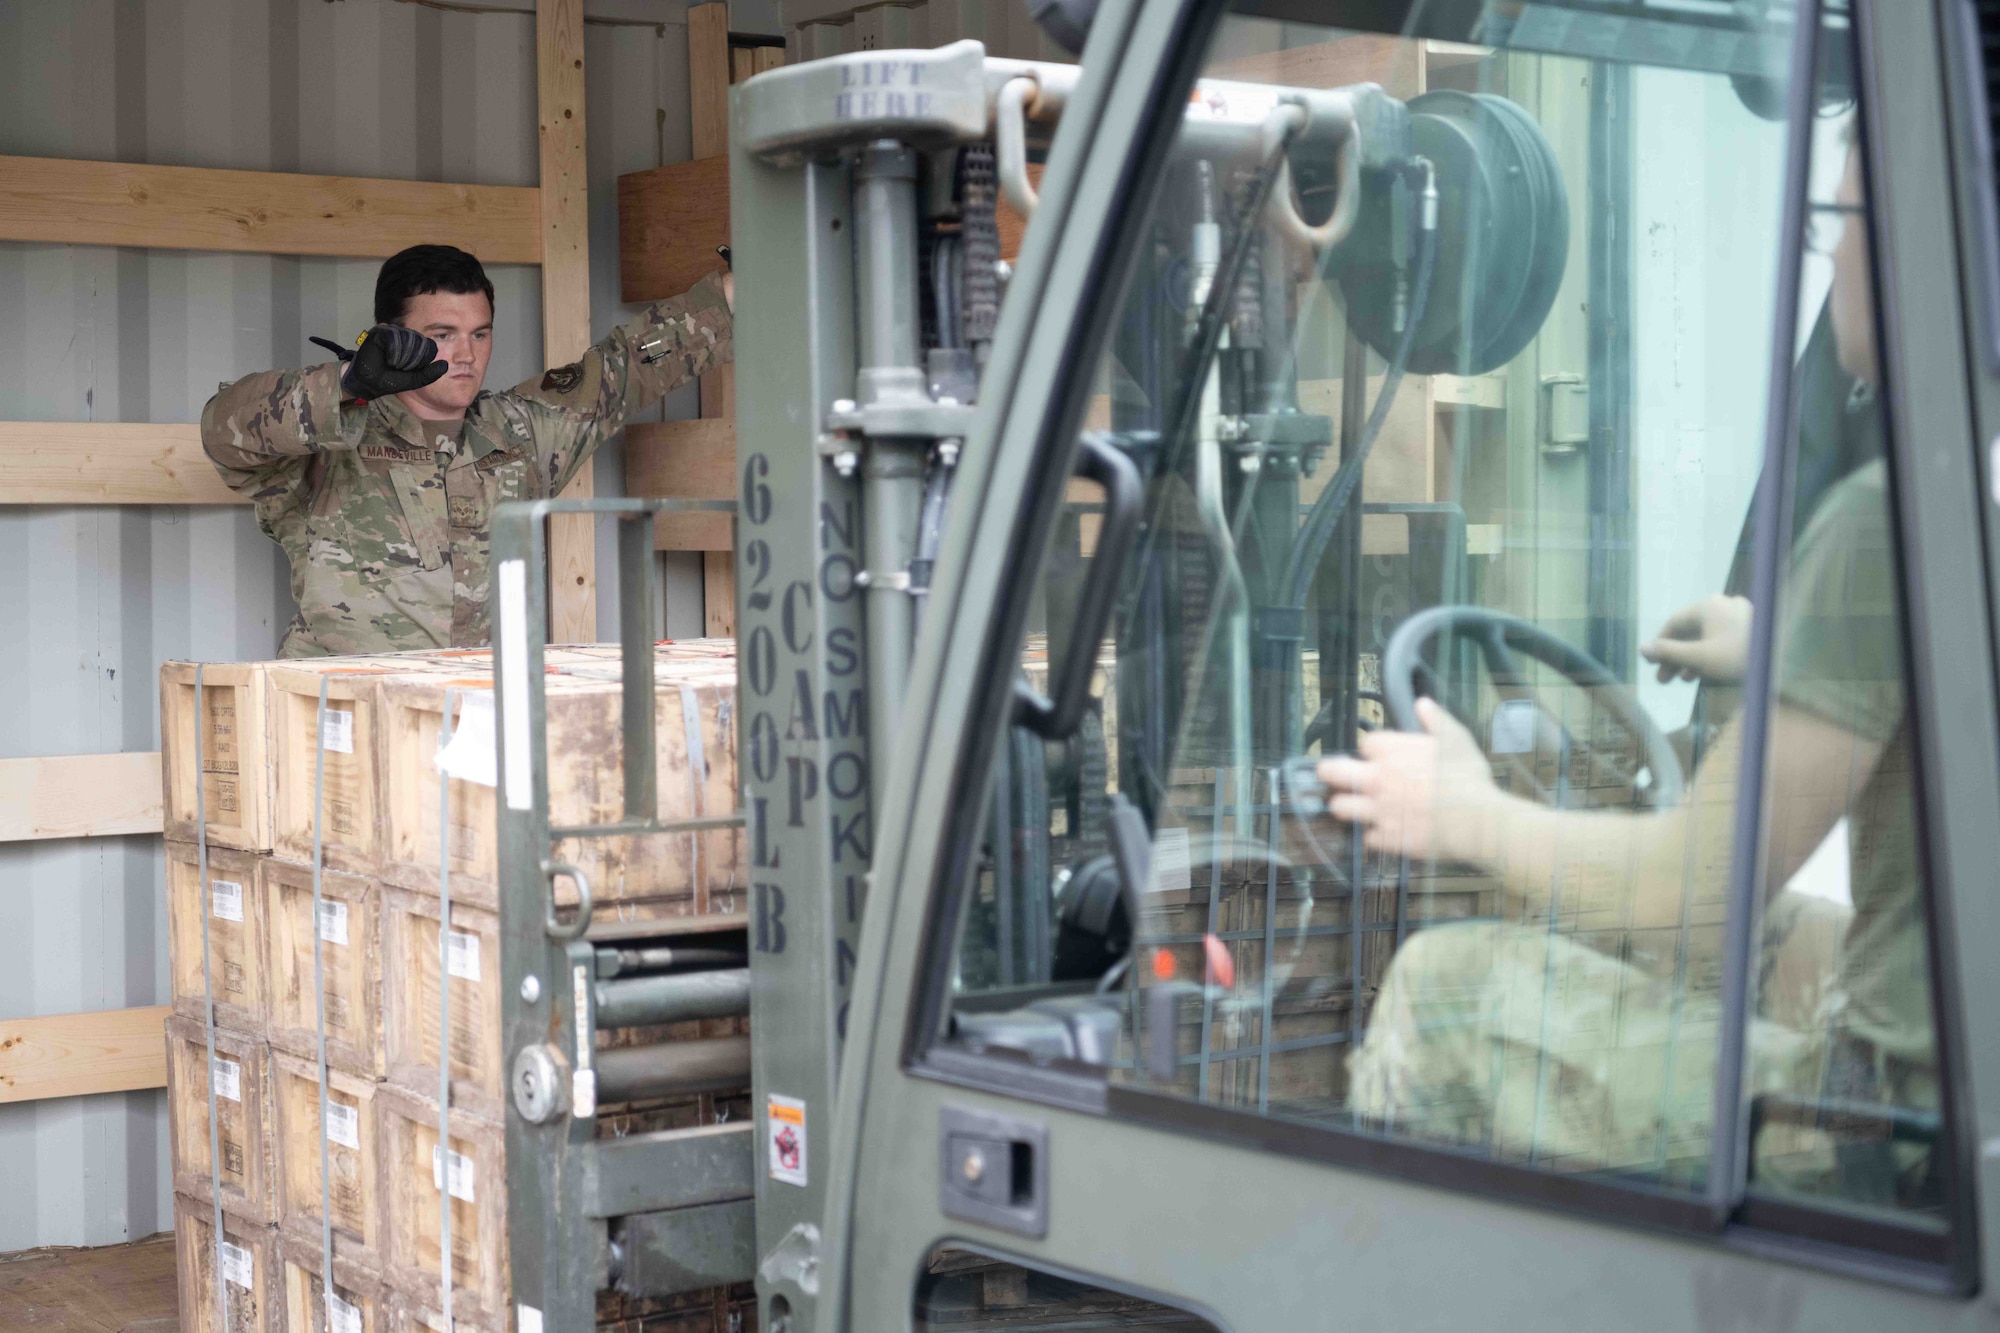 A military member guids another operating a forklift.